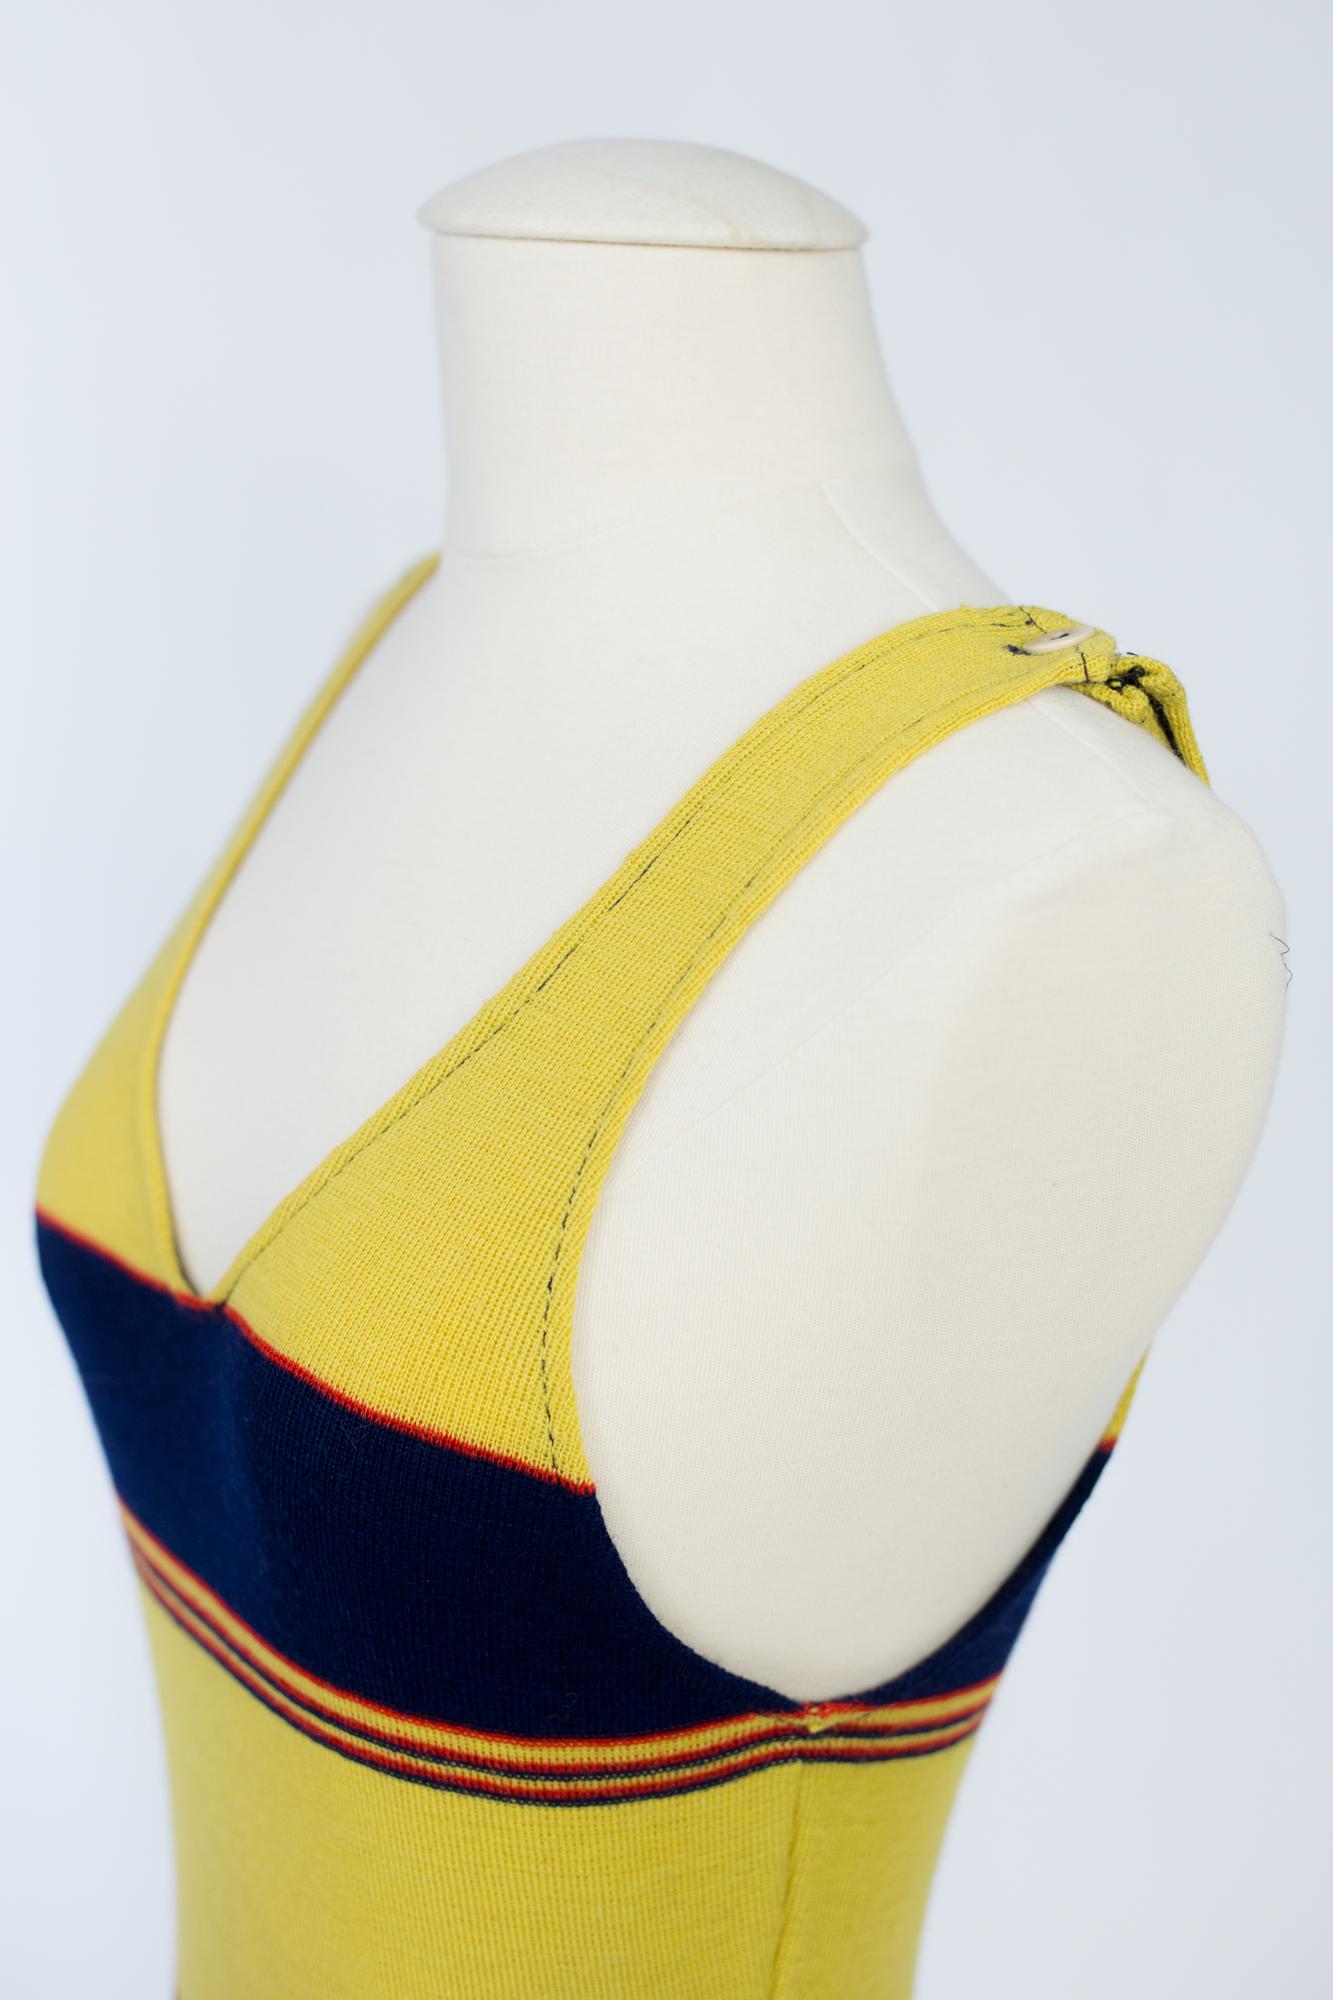 Wool knit Art Deco bathing suit in Chanel or Patou Style- France Circa 1925 For Sale 1